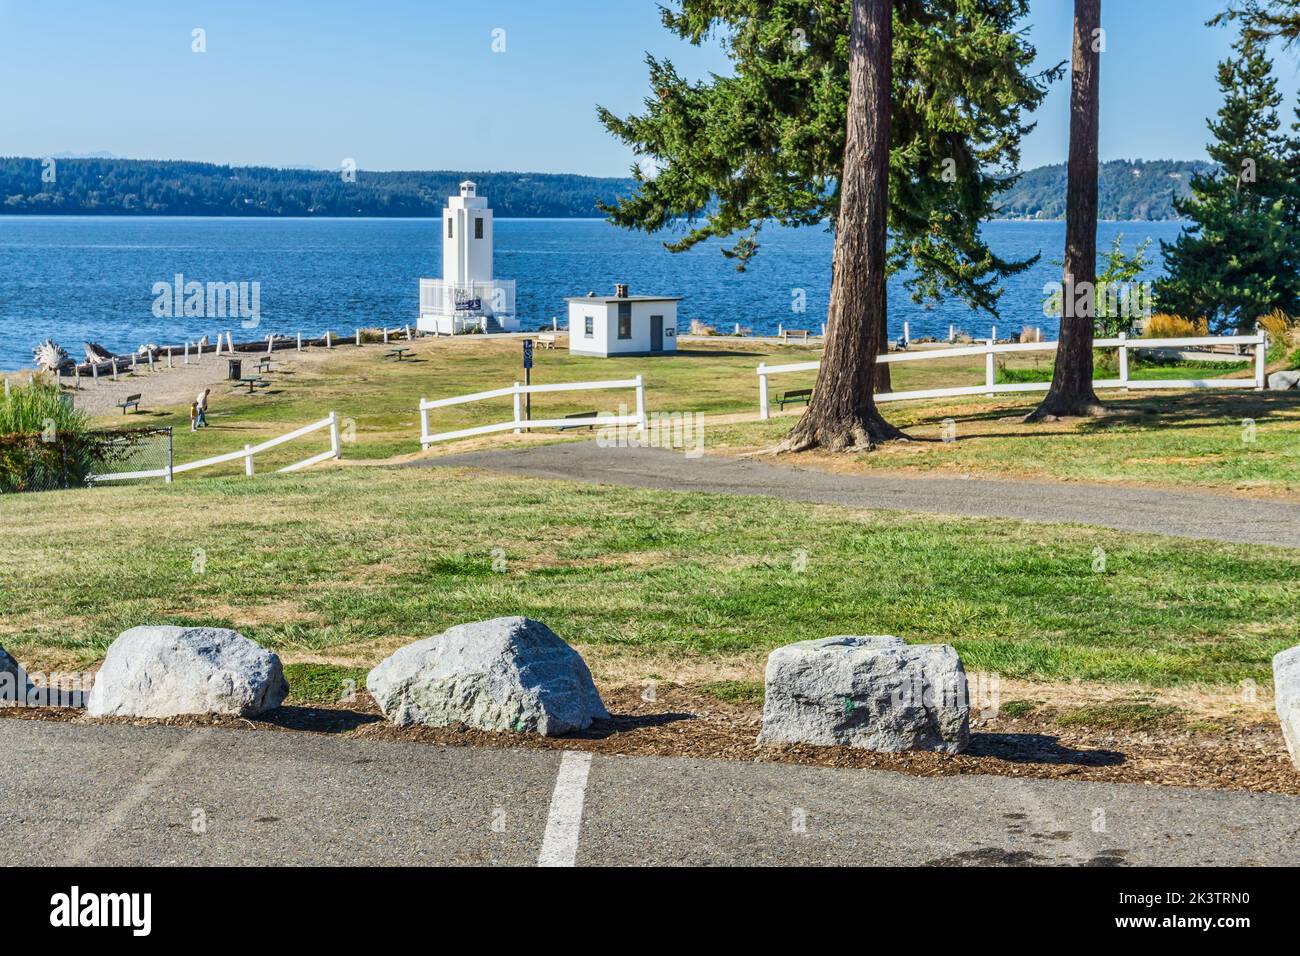 The lighthouse near the water at Brown's Point, Washington. Stock Photo